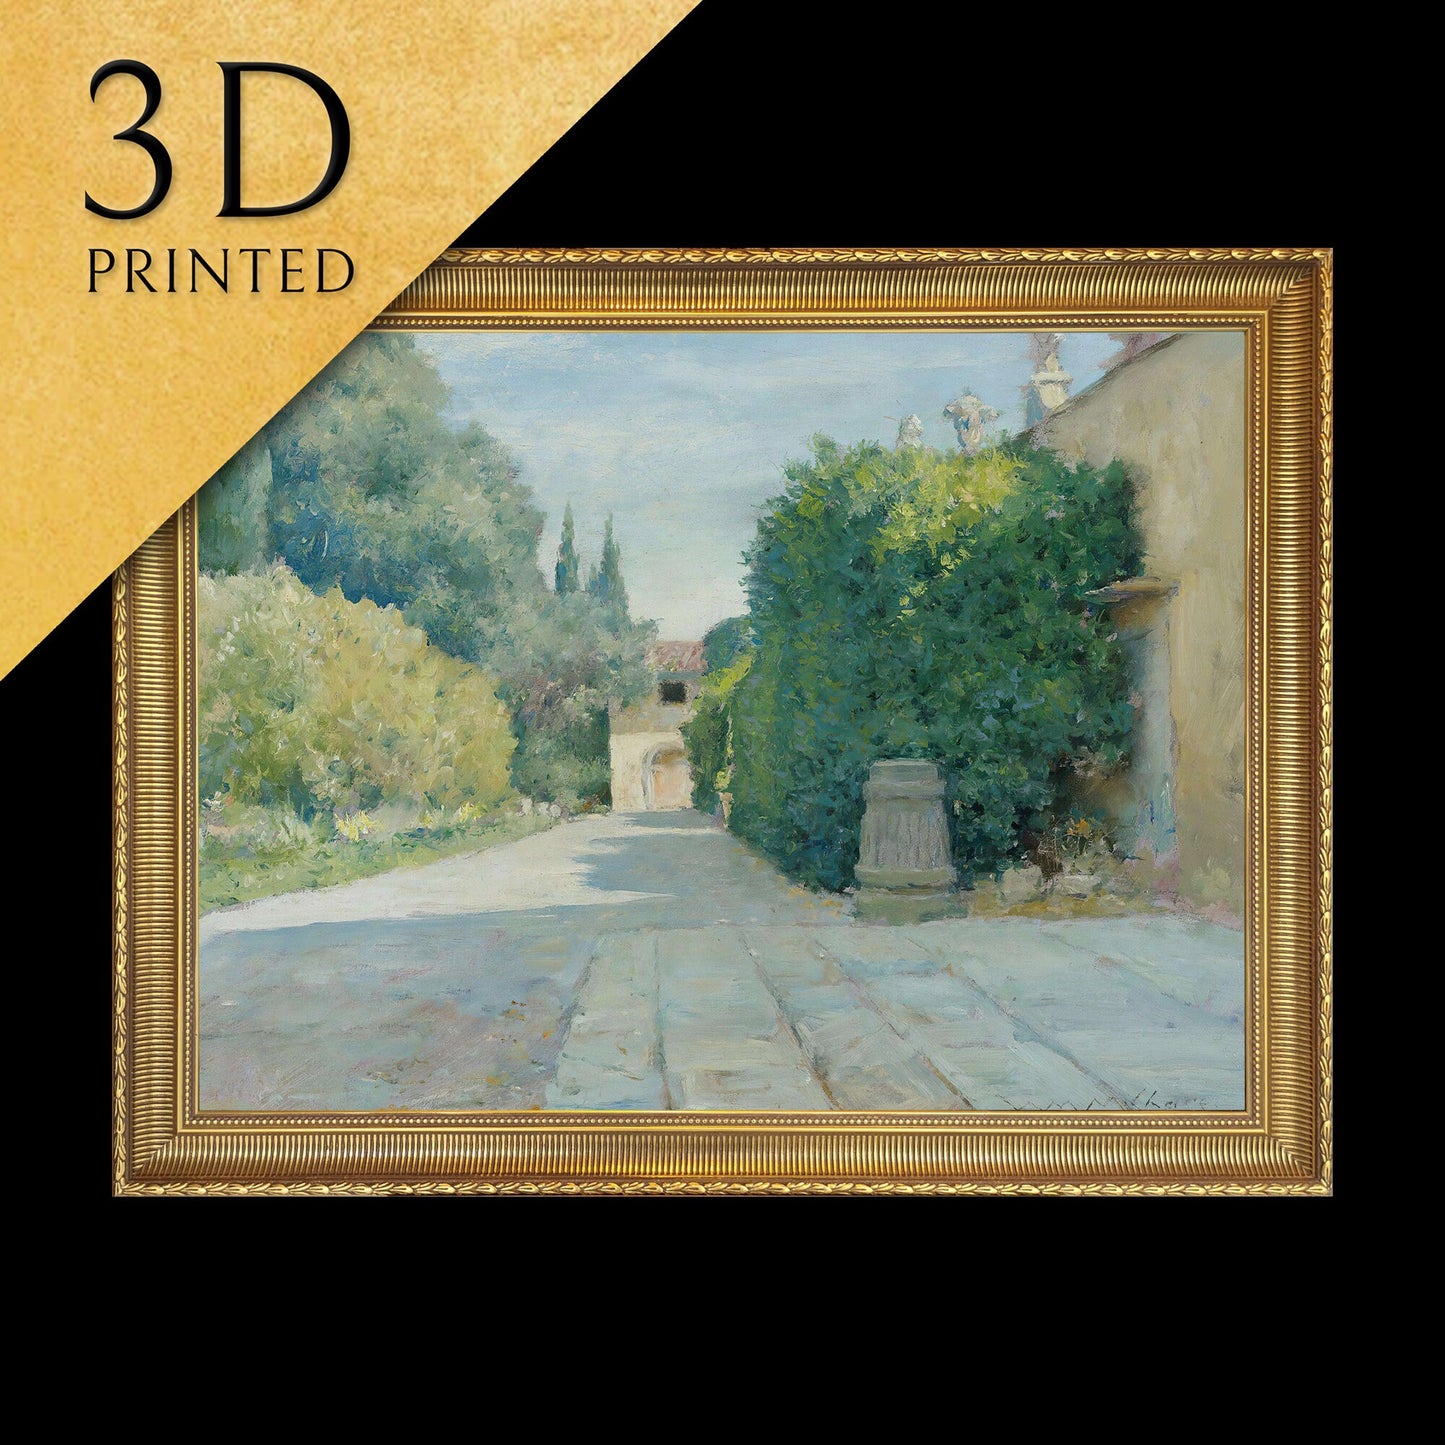 Villa In Florence - by William Merrit Chase, 3d Printed with texture and brush strokes looks like original oil-painting, code:802